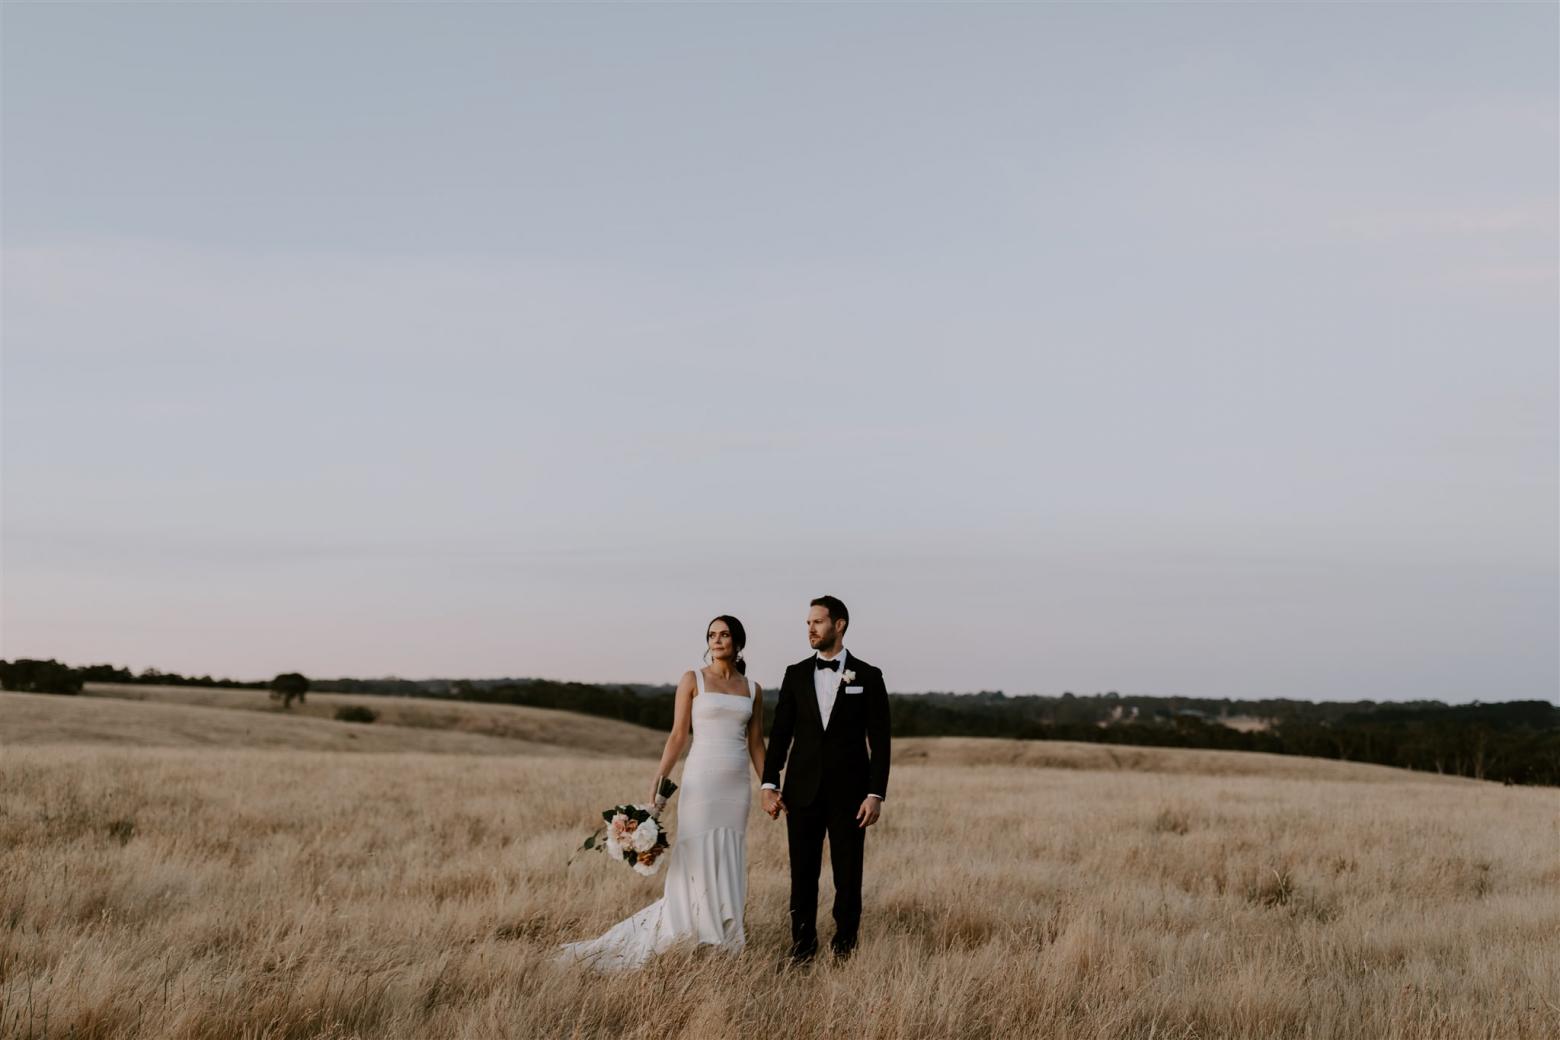 KWH bride Rachael and Adam in a picturesque field. Rachael wears the Violet gown.